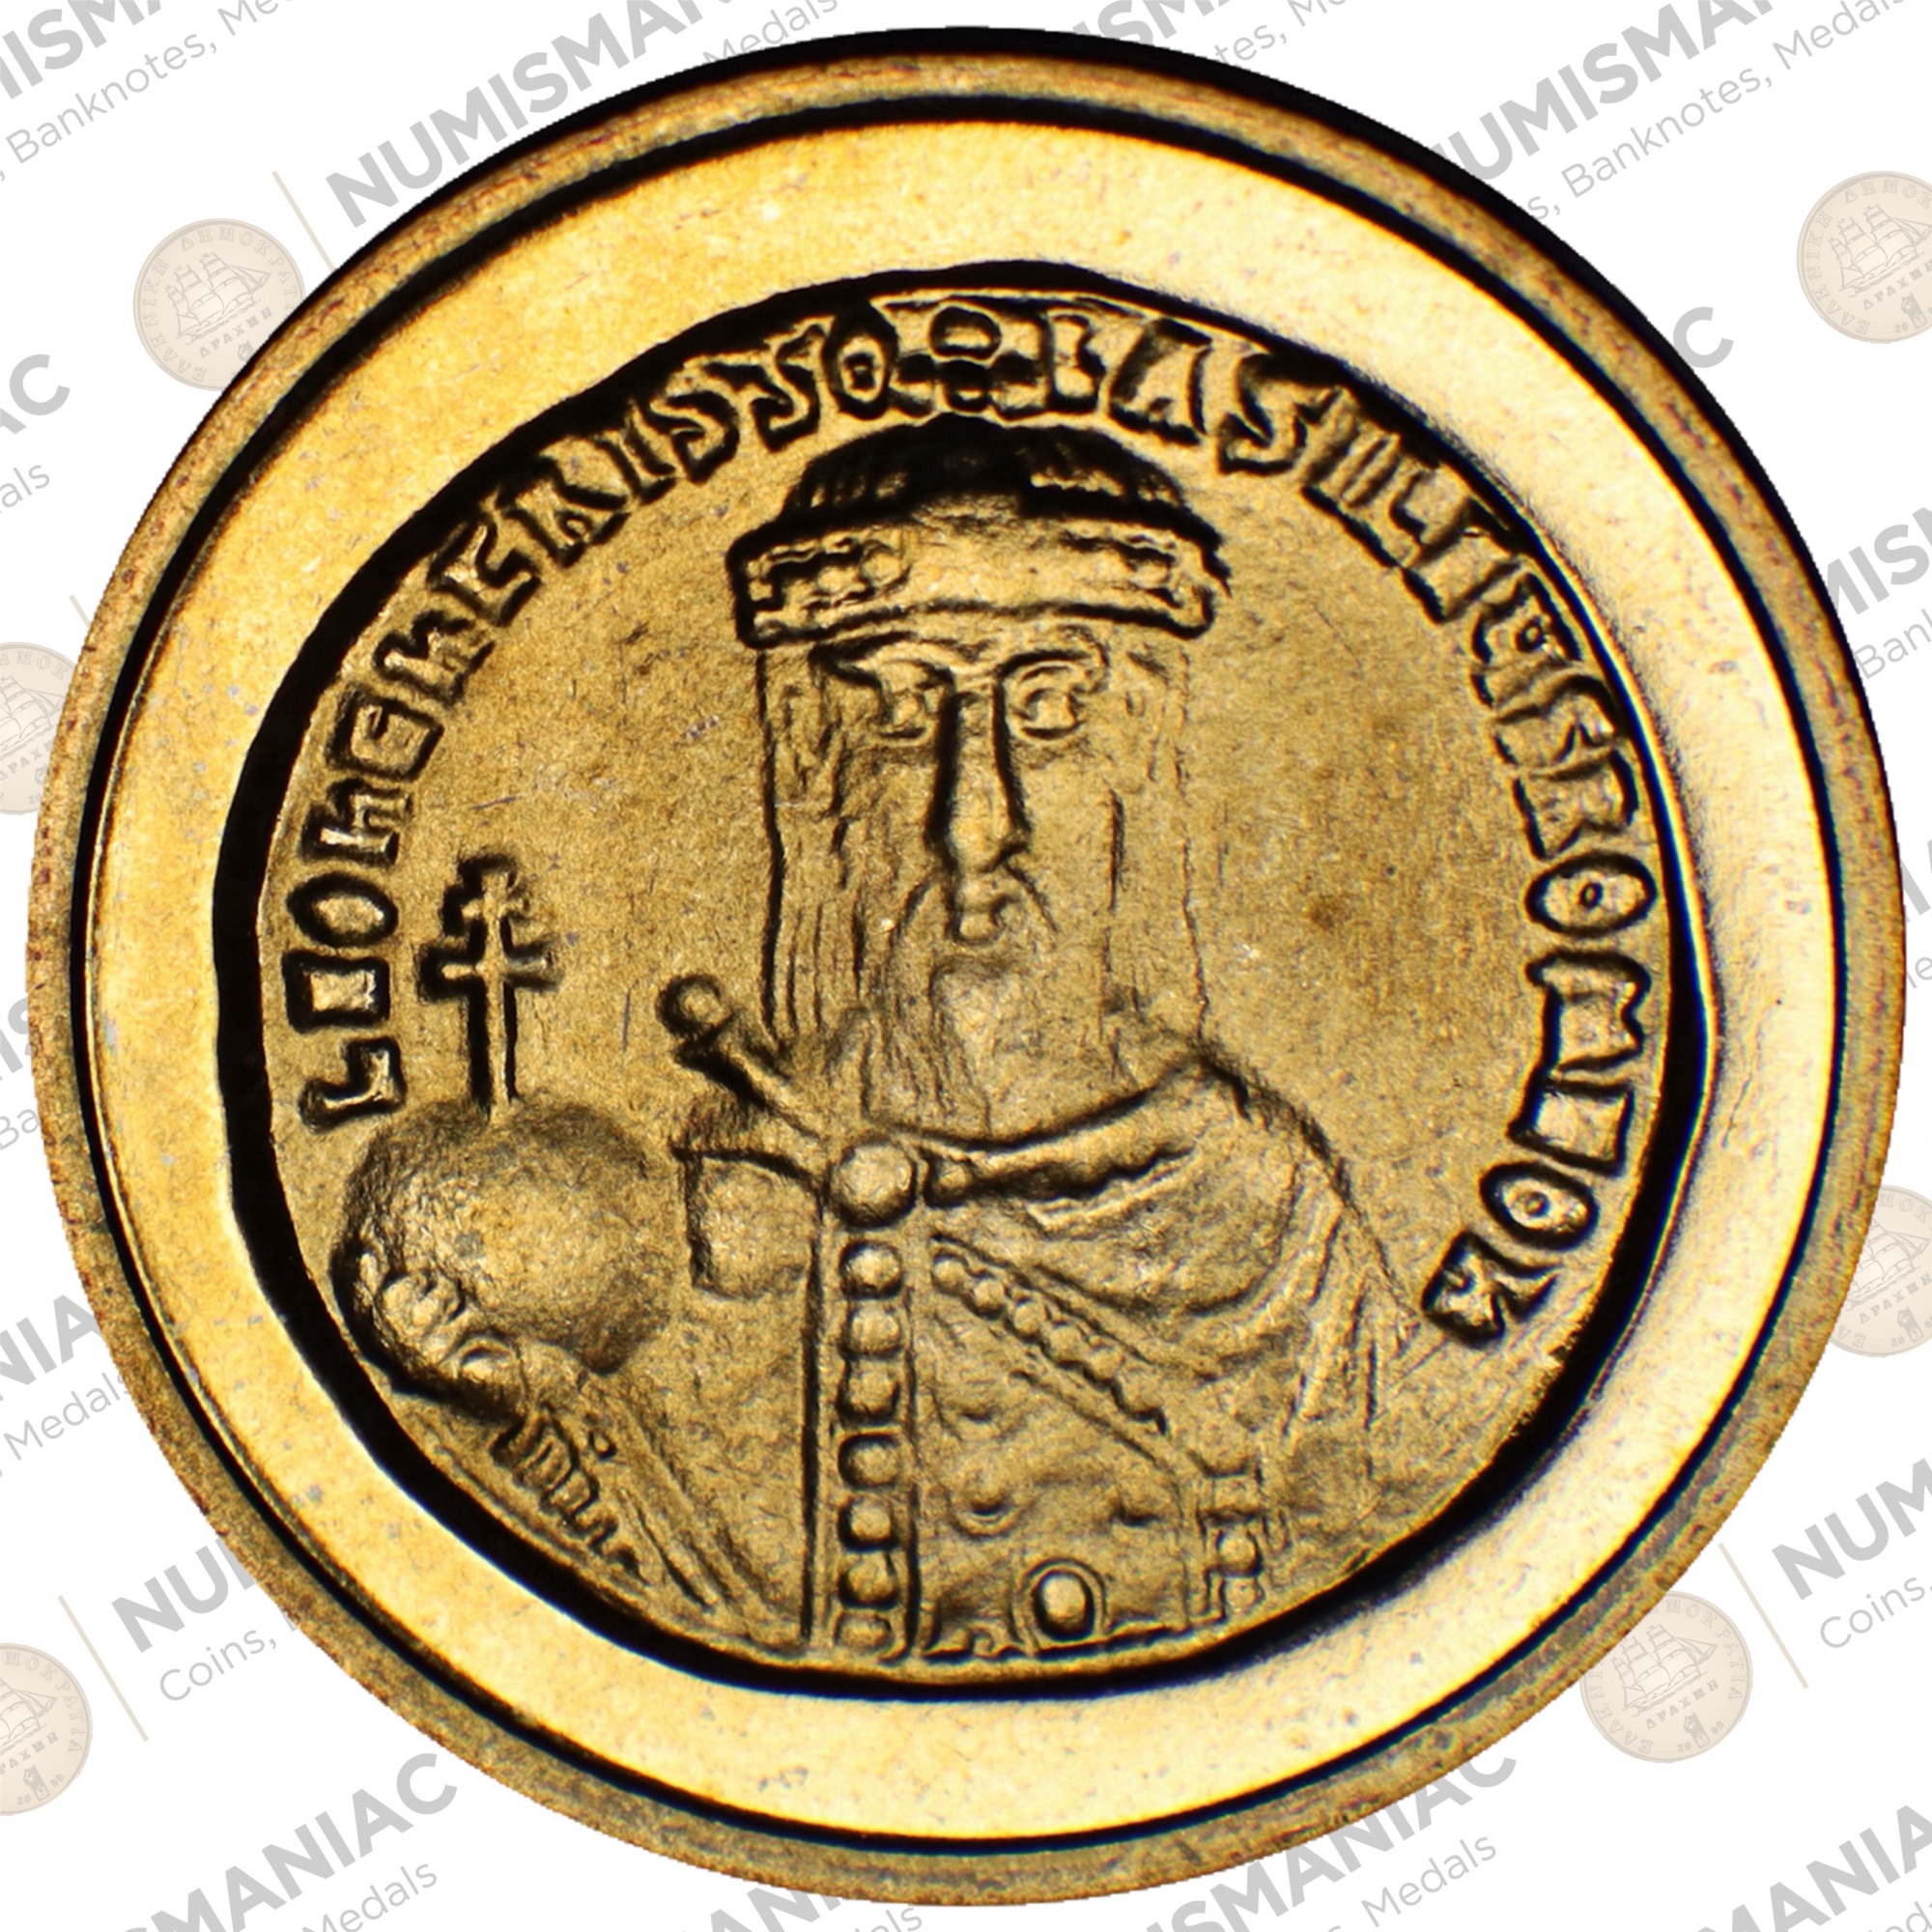 Greece 🇬🇷 Numismatic Museum 2011 Medal for European Cultural Heritage Days. A